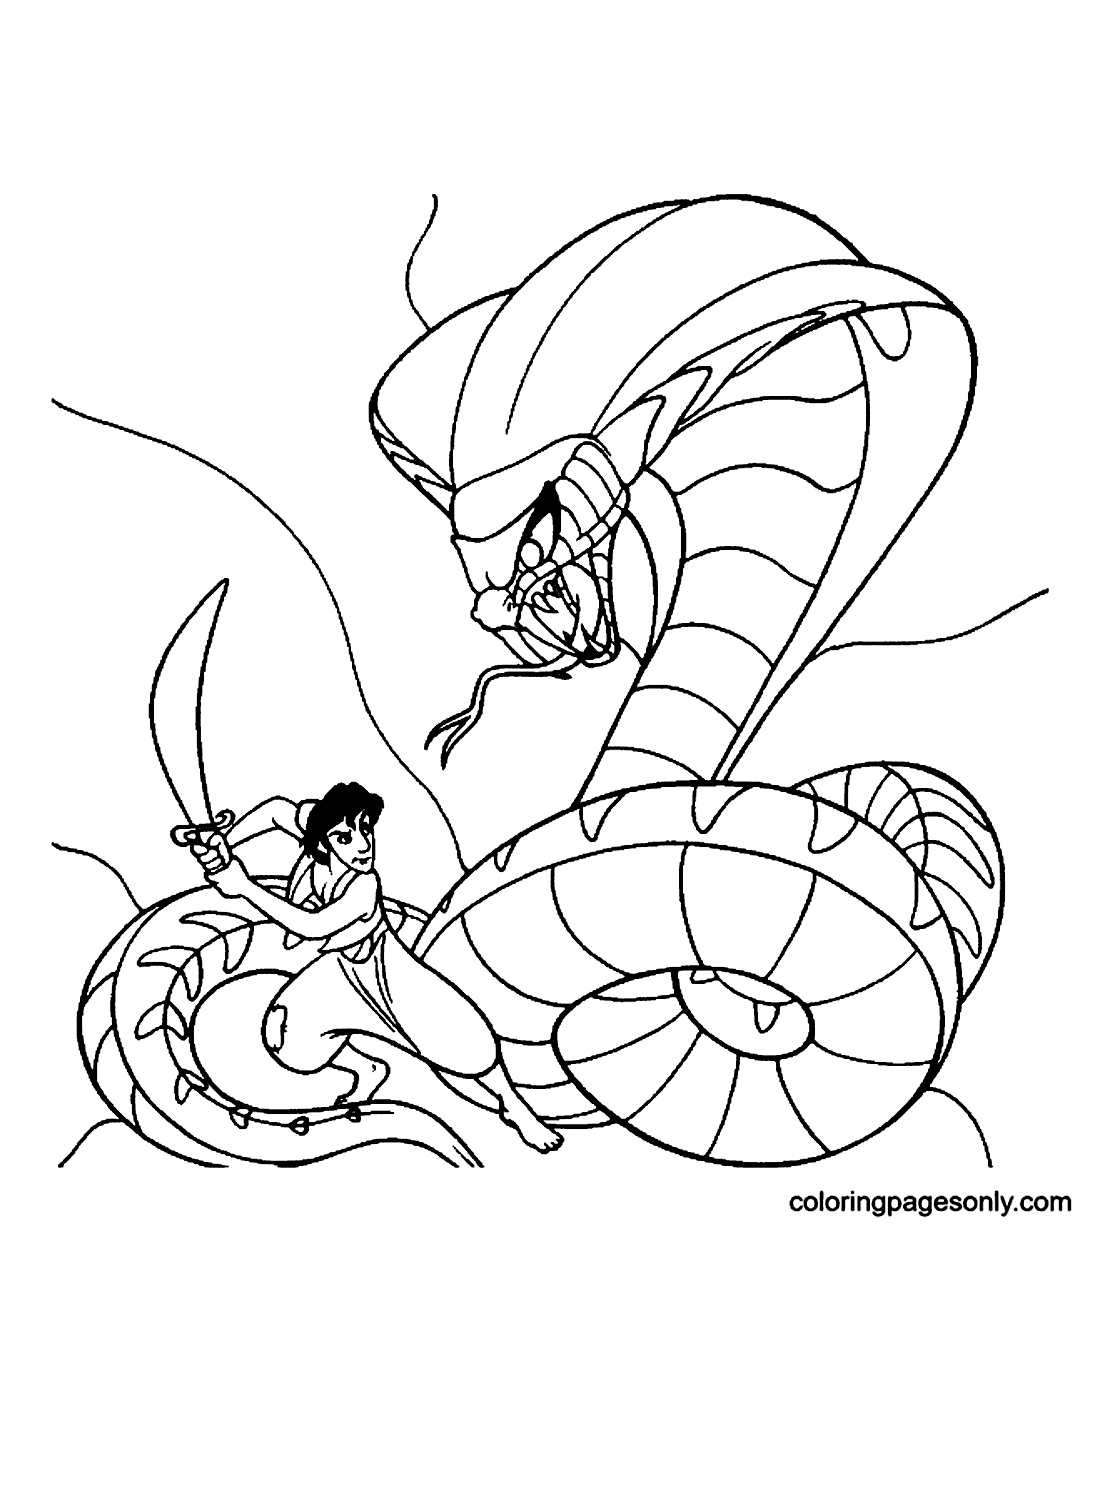 Aladin fighting Jafar the snake Coloring Page